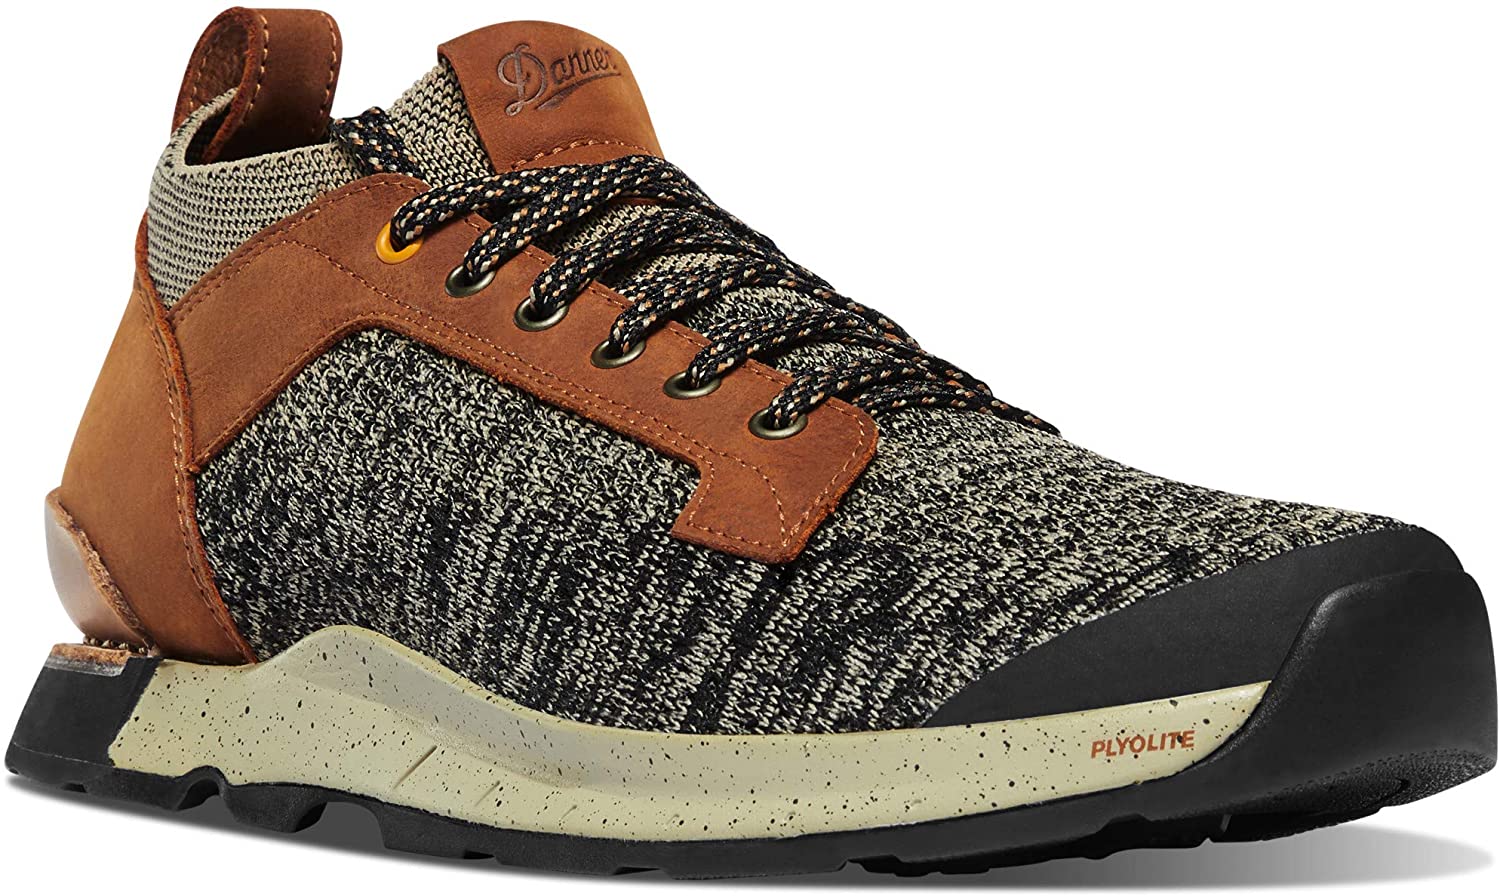 Men's Danner Overlook Knit Low 3" Lifestyle Shoe in Glazed Ginger/Orion from the side view